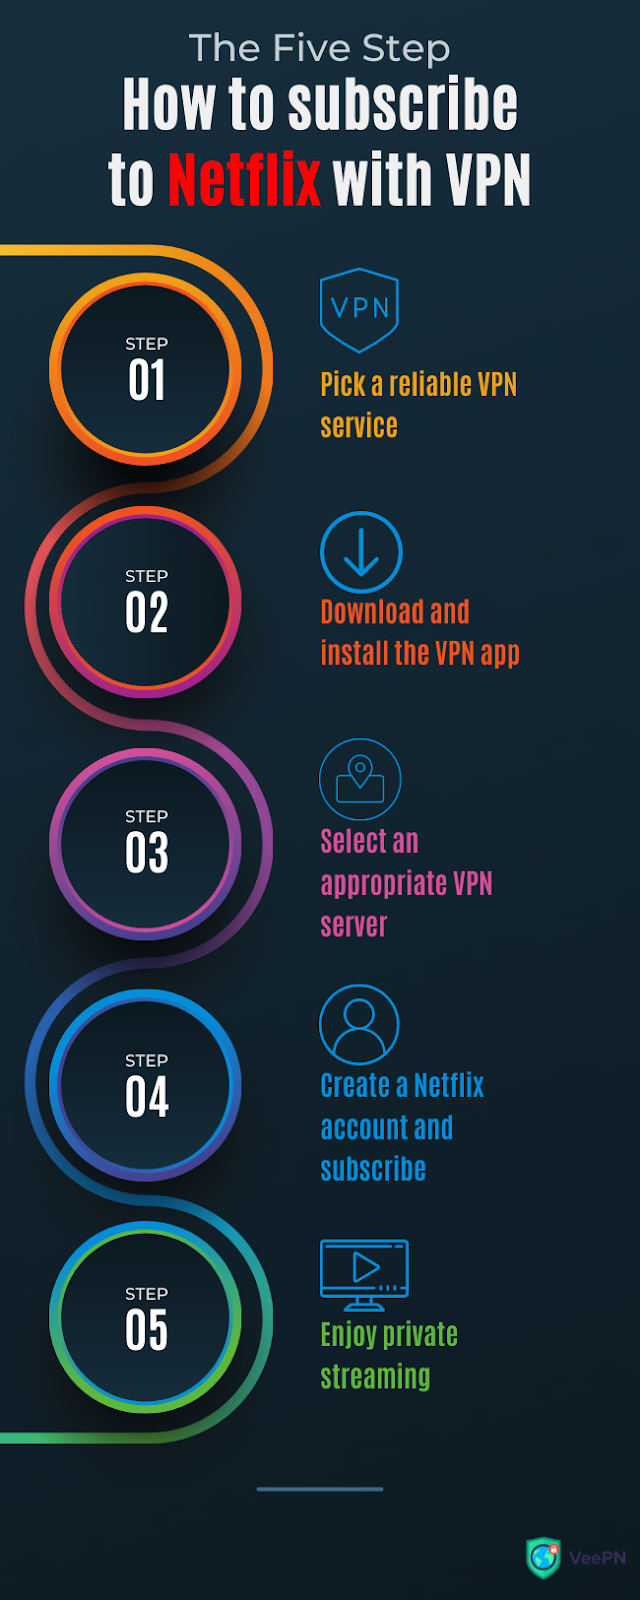 How to subscribe to Netflix with VPN.